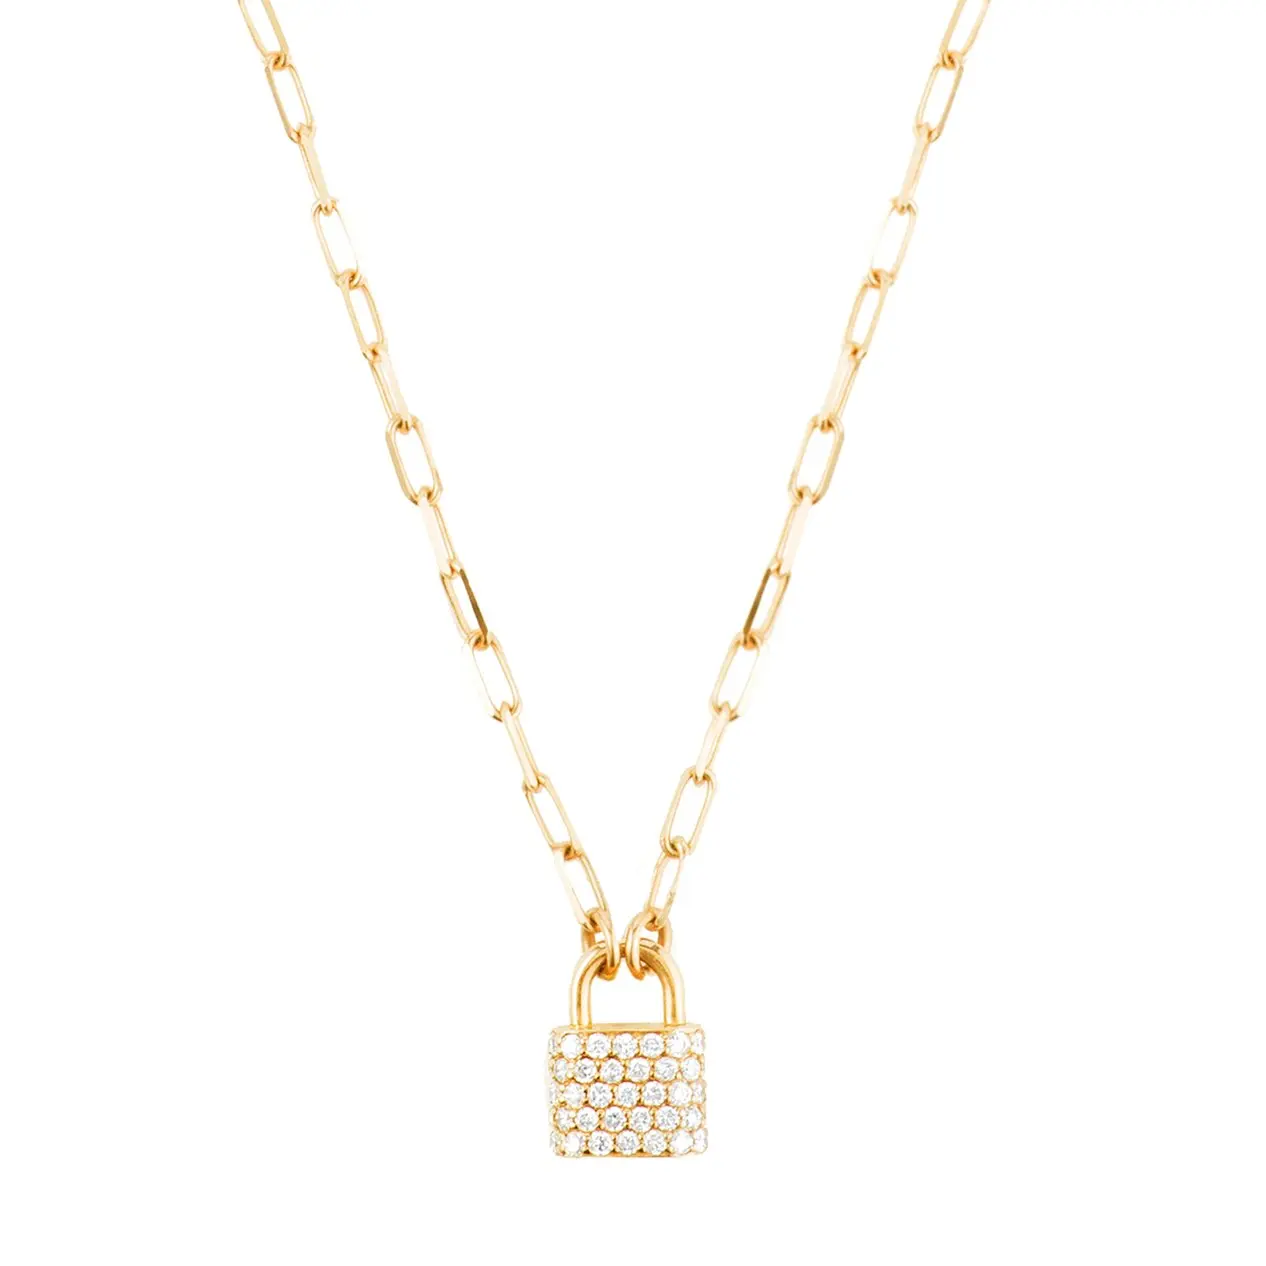 Gold Padlock Necklace Gold Rectangle Chain Necklace Rectangle Chain Lock Necklace